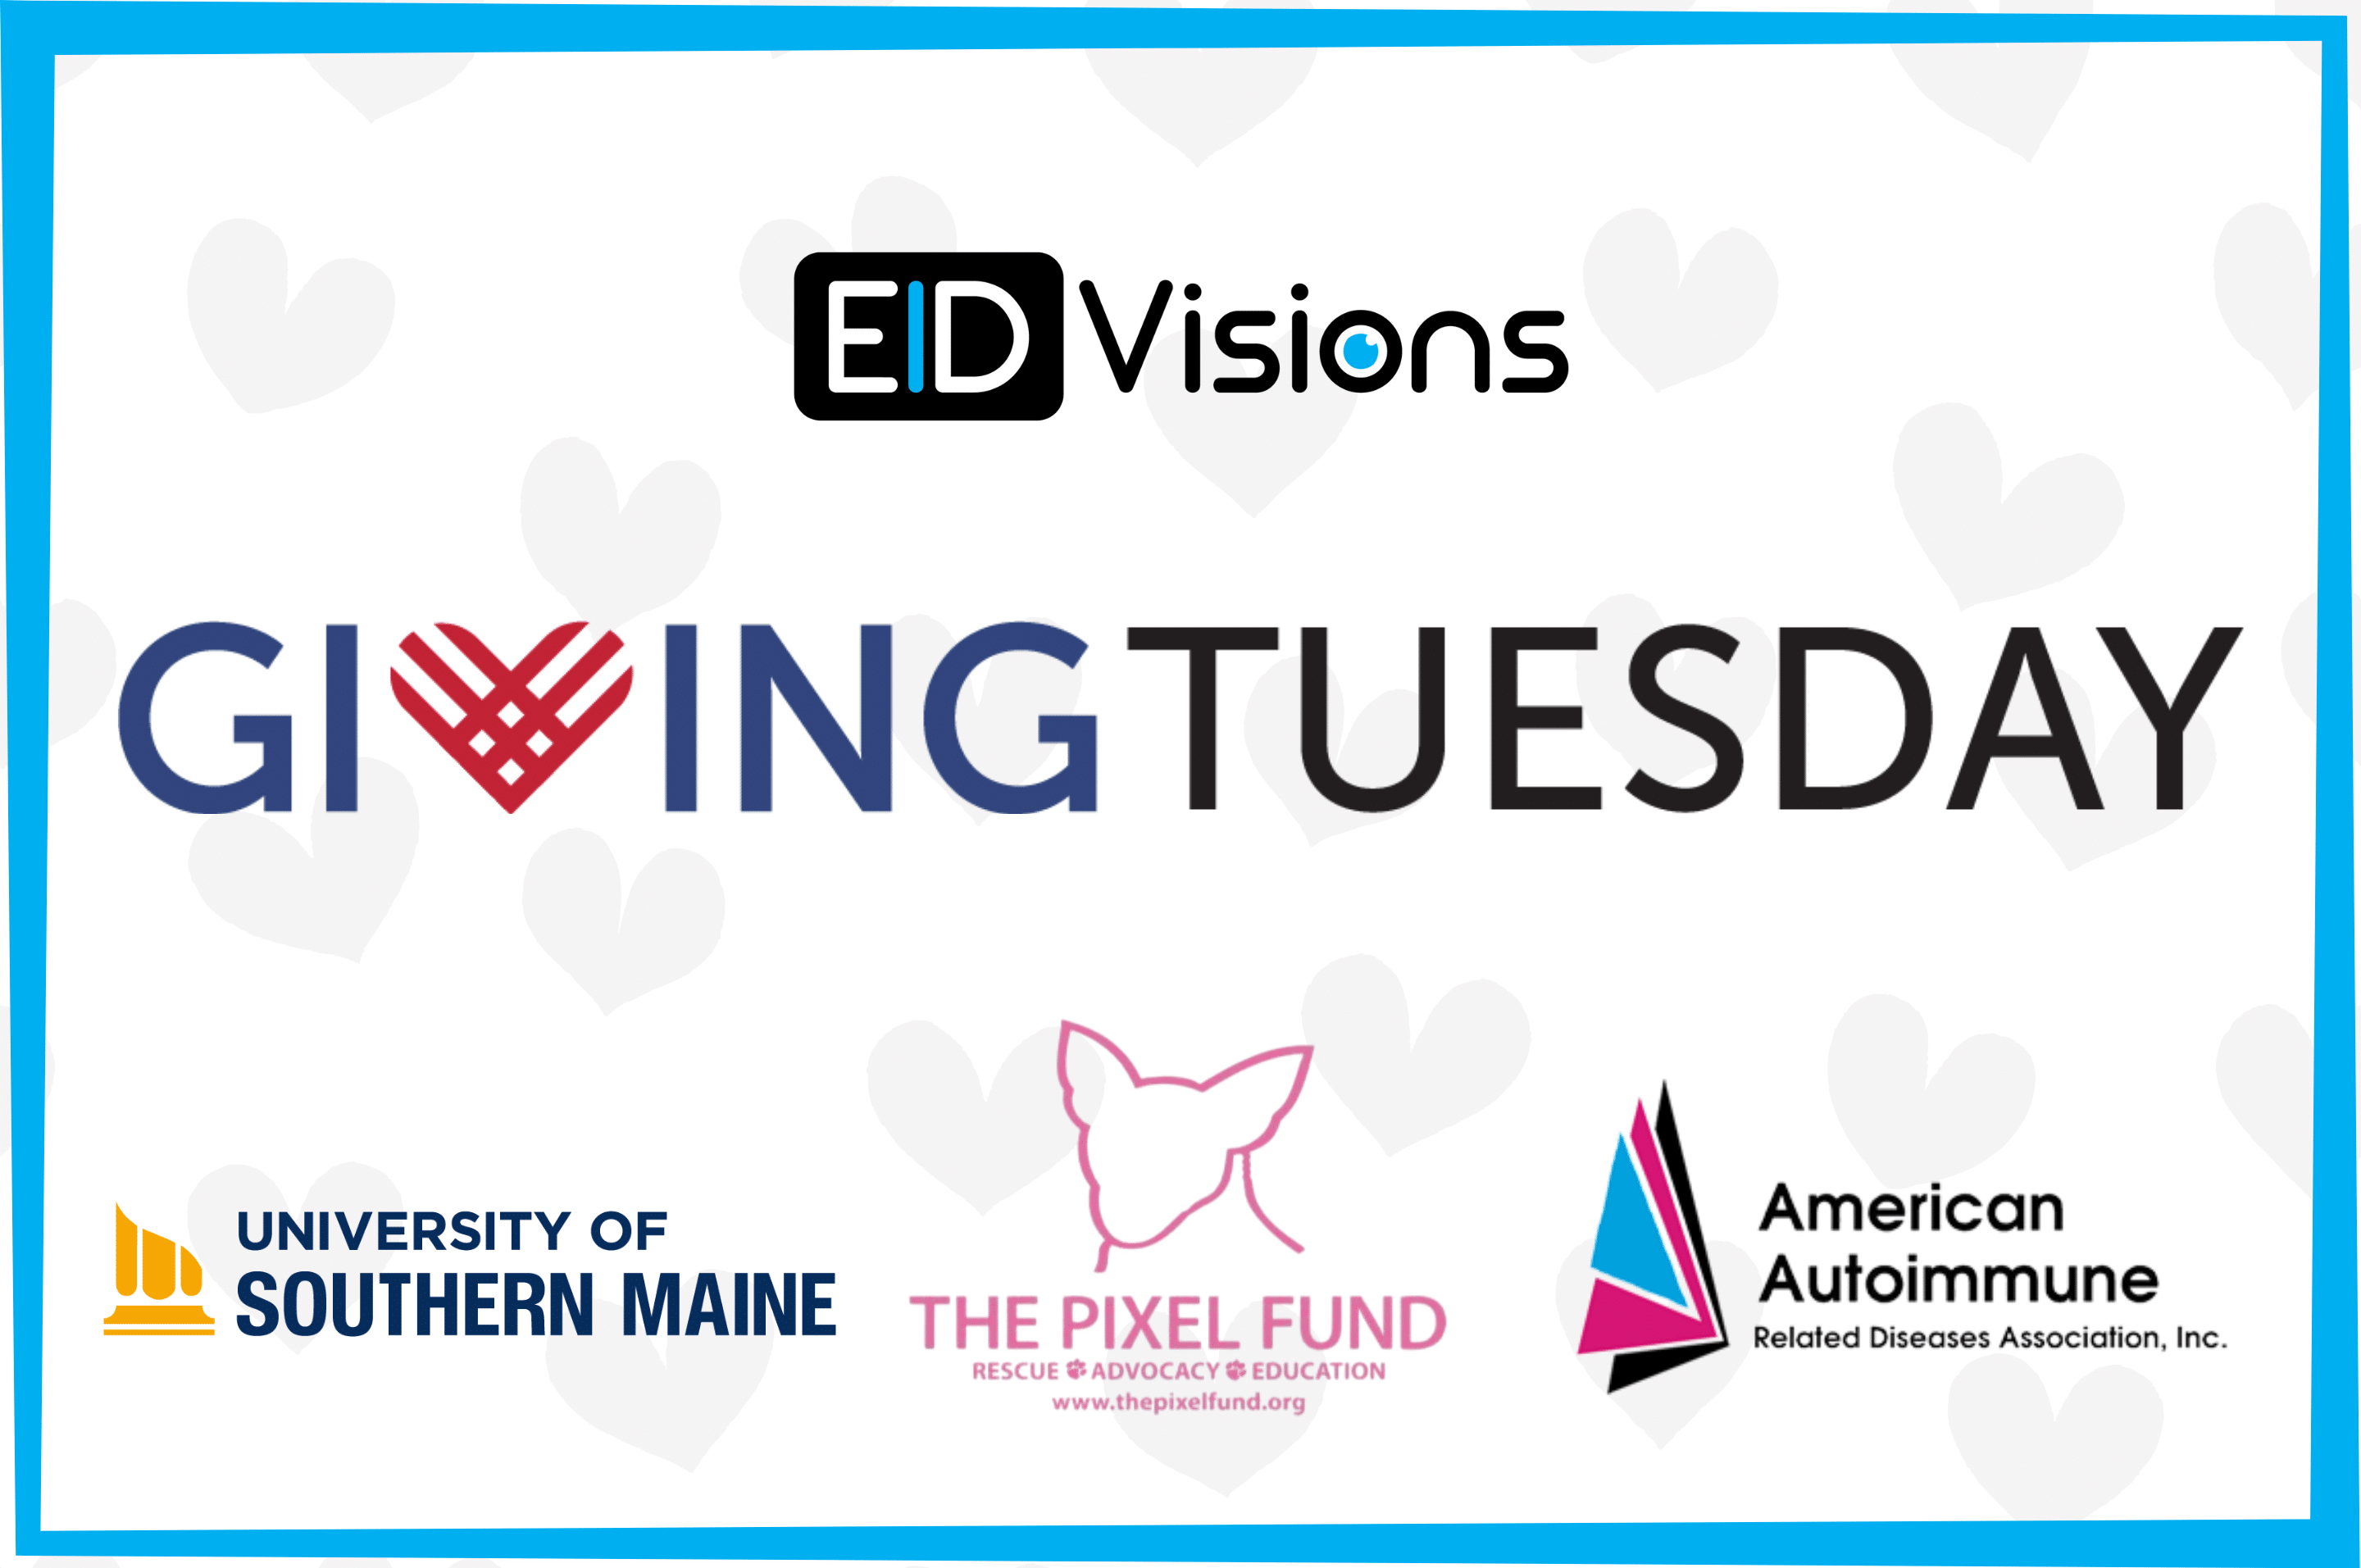 a graphic with the giving tuesday, eid visions, pixel fund, aarda, and usm logo